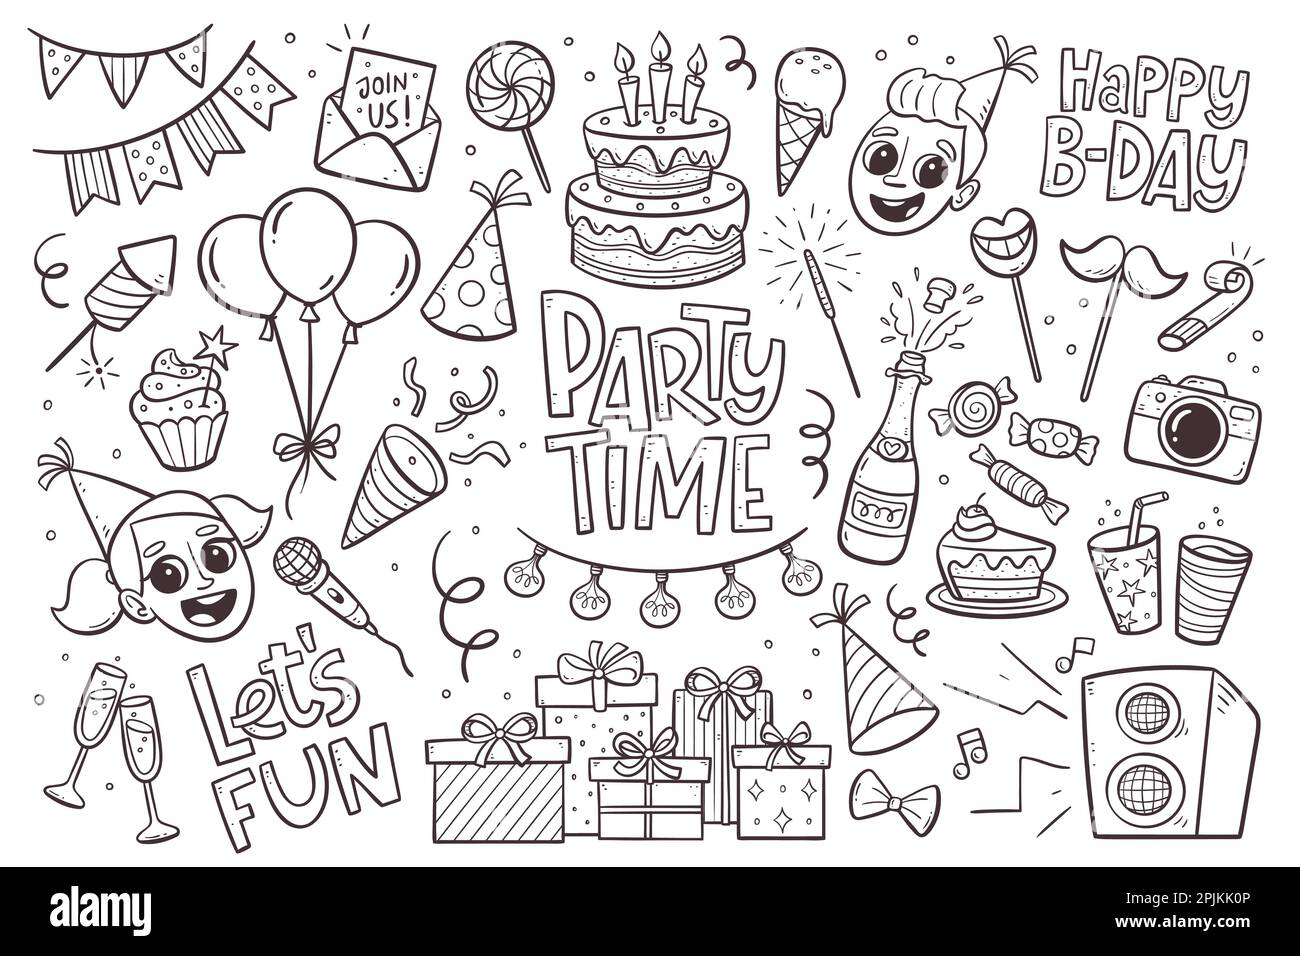 Kids party doodle elements for invitations, greeting cards, backgrounds... Happy birthday hand drawn set. Vector illustration isolated on white. Stock Vector